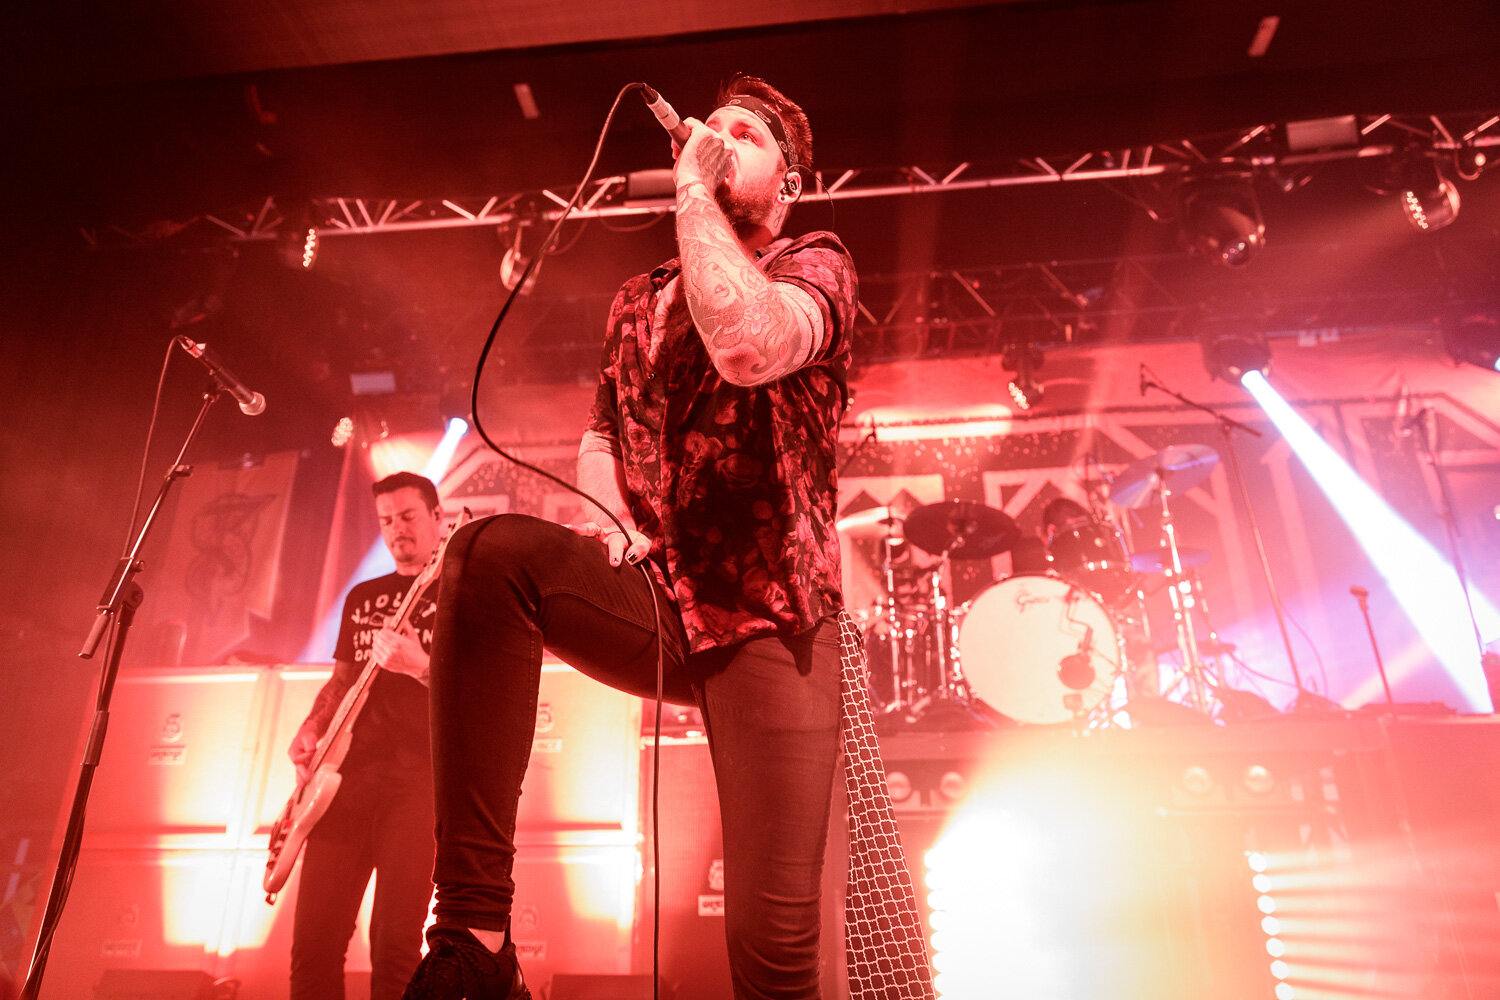 Beartooth at the Manchester Academy on February 28th 2020